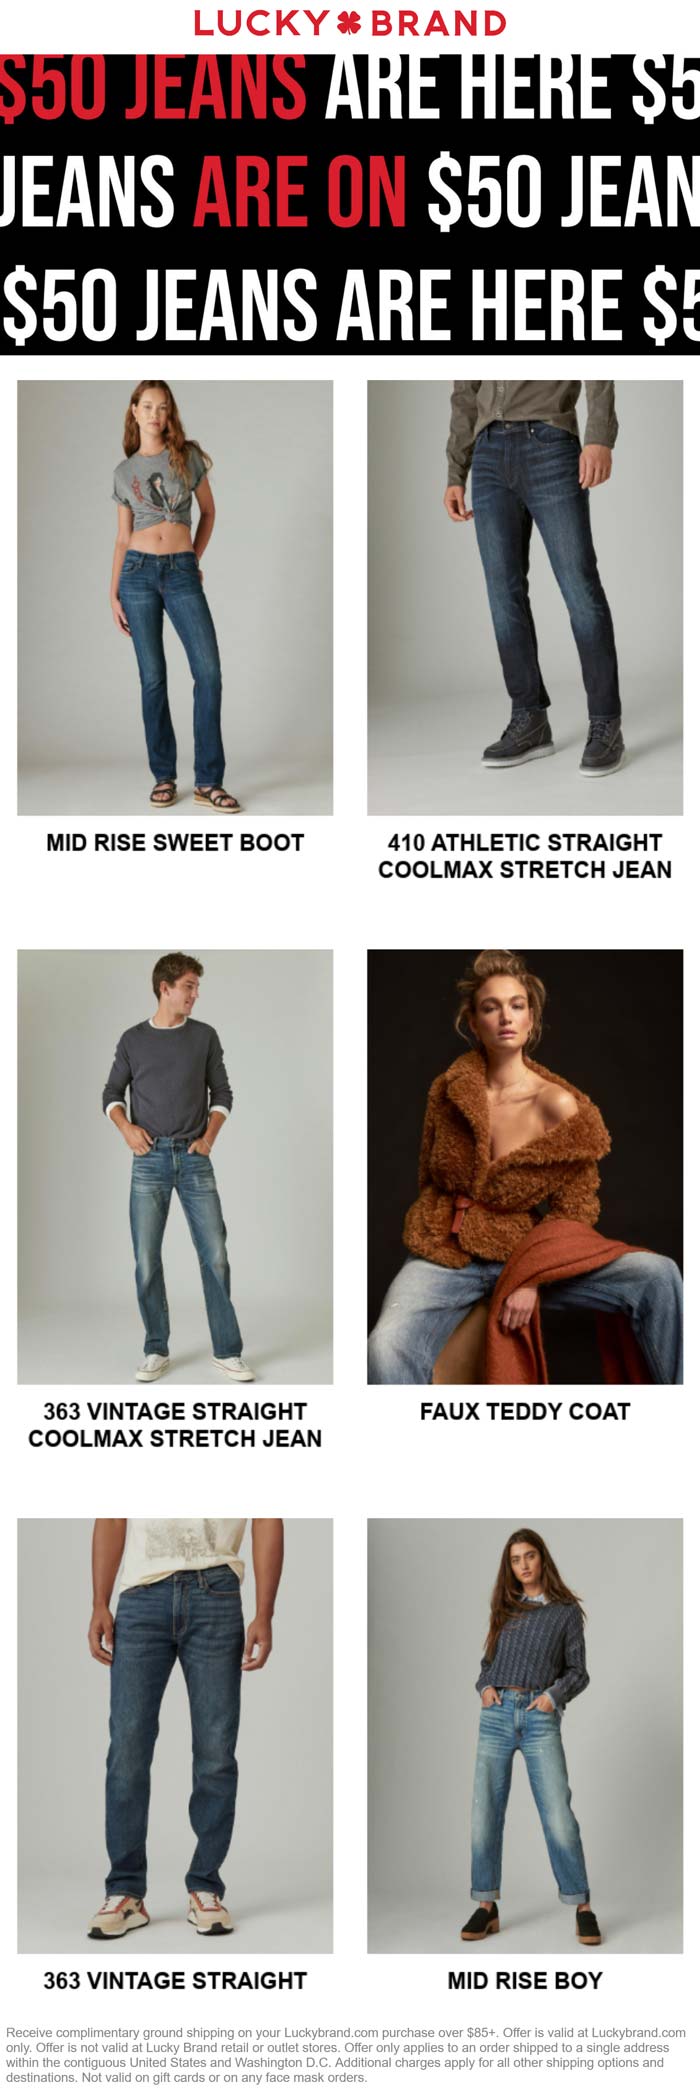 Lucky Brand stores Coupon  Various jeans for $50 going on at Lucky Brand #luckybrand 